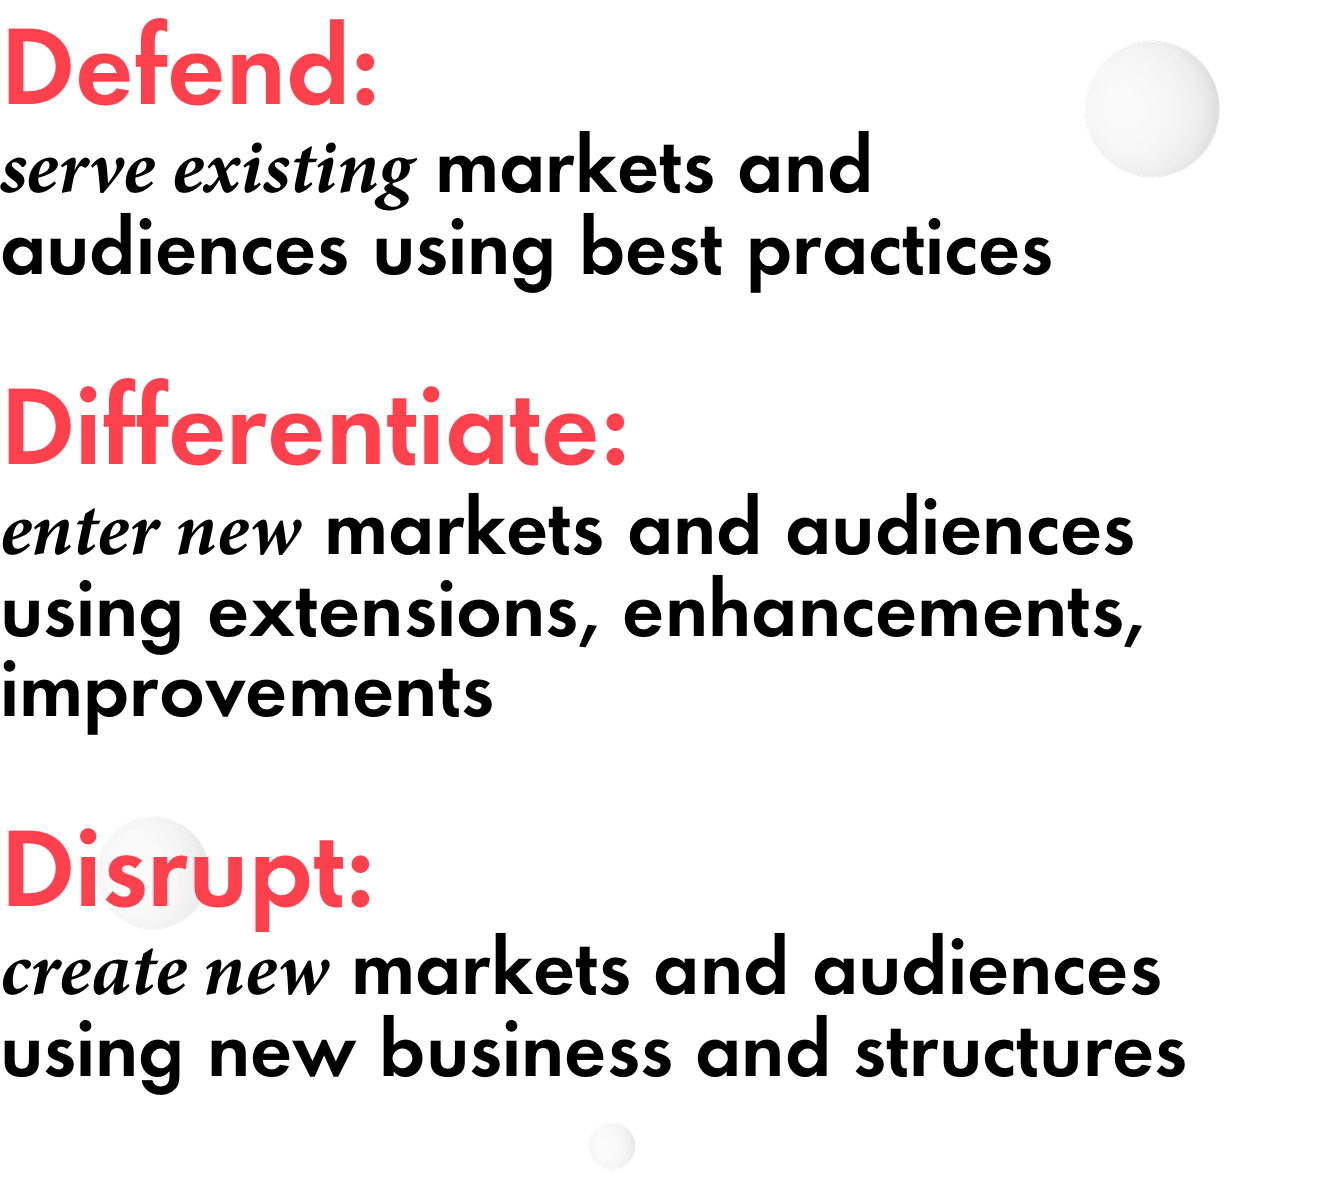 Graphic displays 3 bullet points: 1) Defend: serve existing markets and audiences using best practices 2) Differentiate: enter new markets and audiences using extensions, enhancements, improvements 3) Disrupt: create new markets and audiences using new business and structures